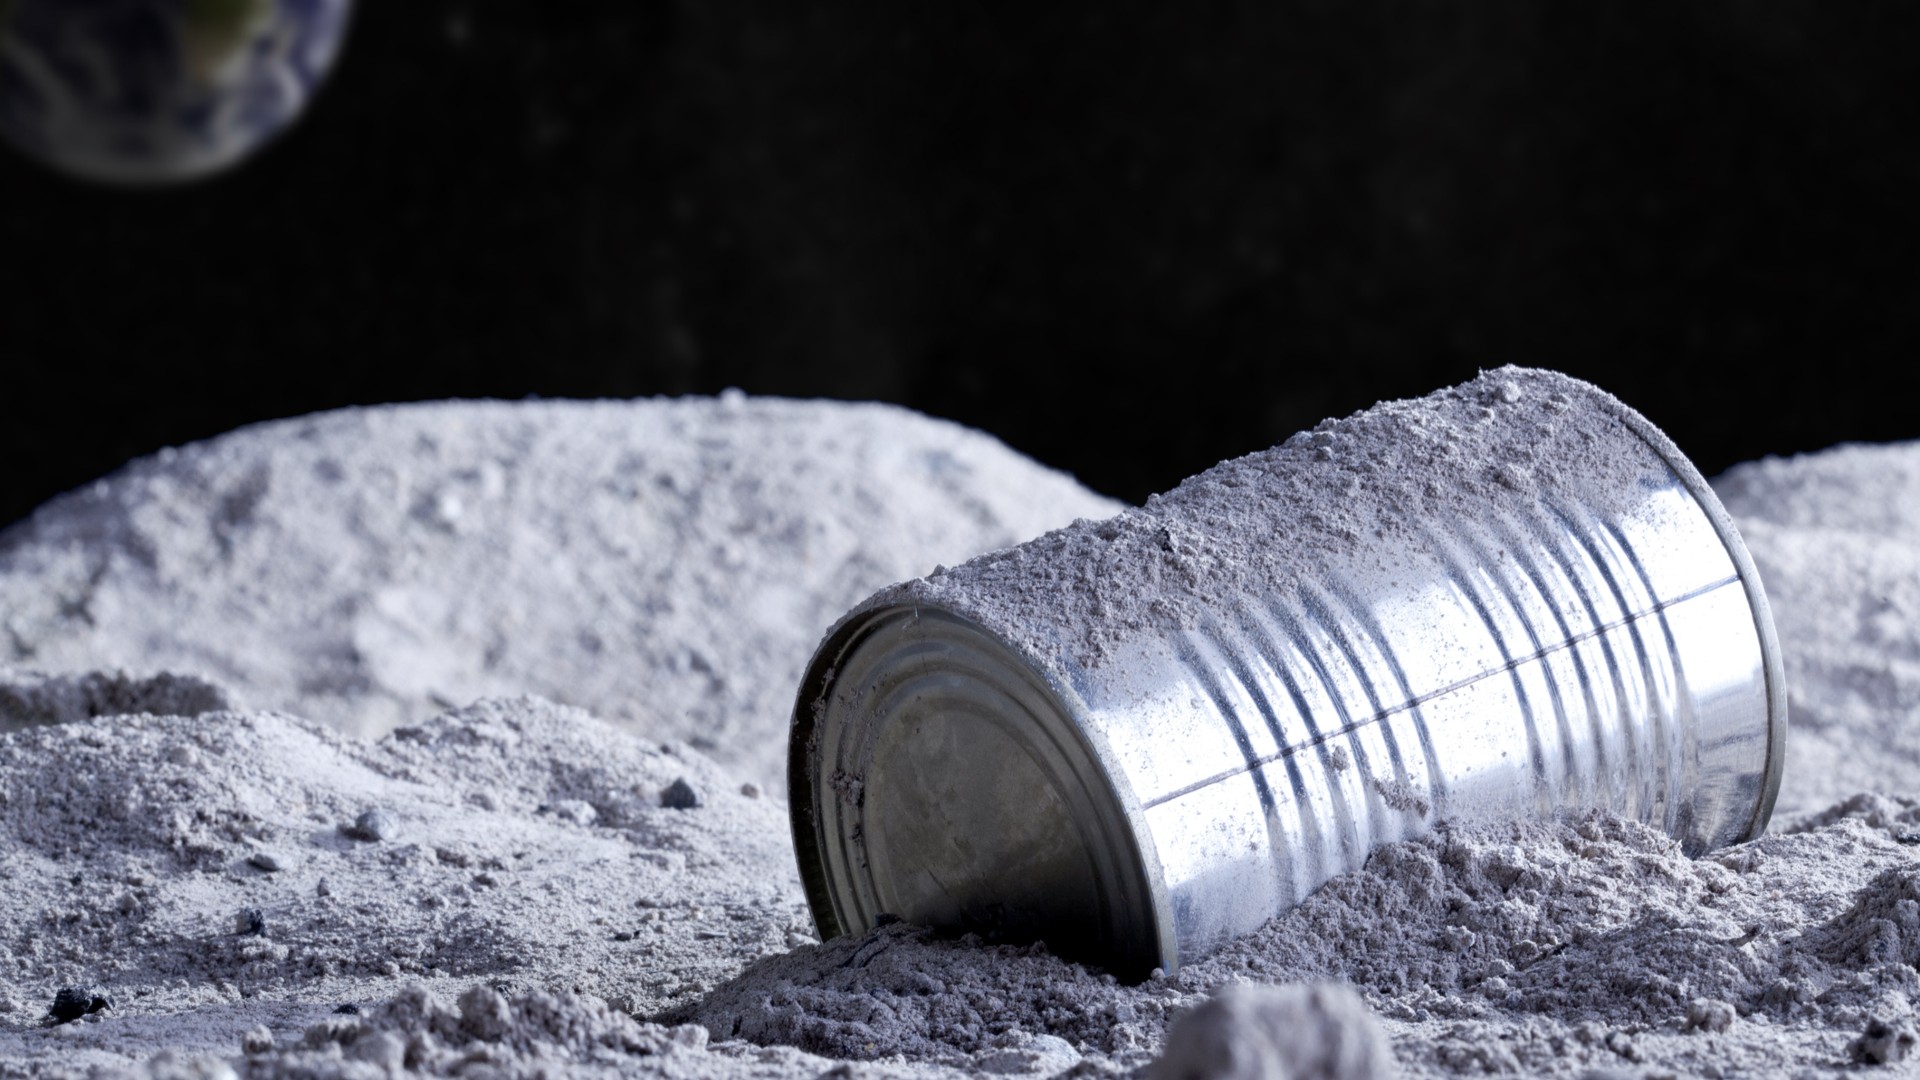  NASA wants fresh ideas for recycling garbage on the moon 